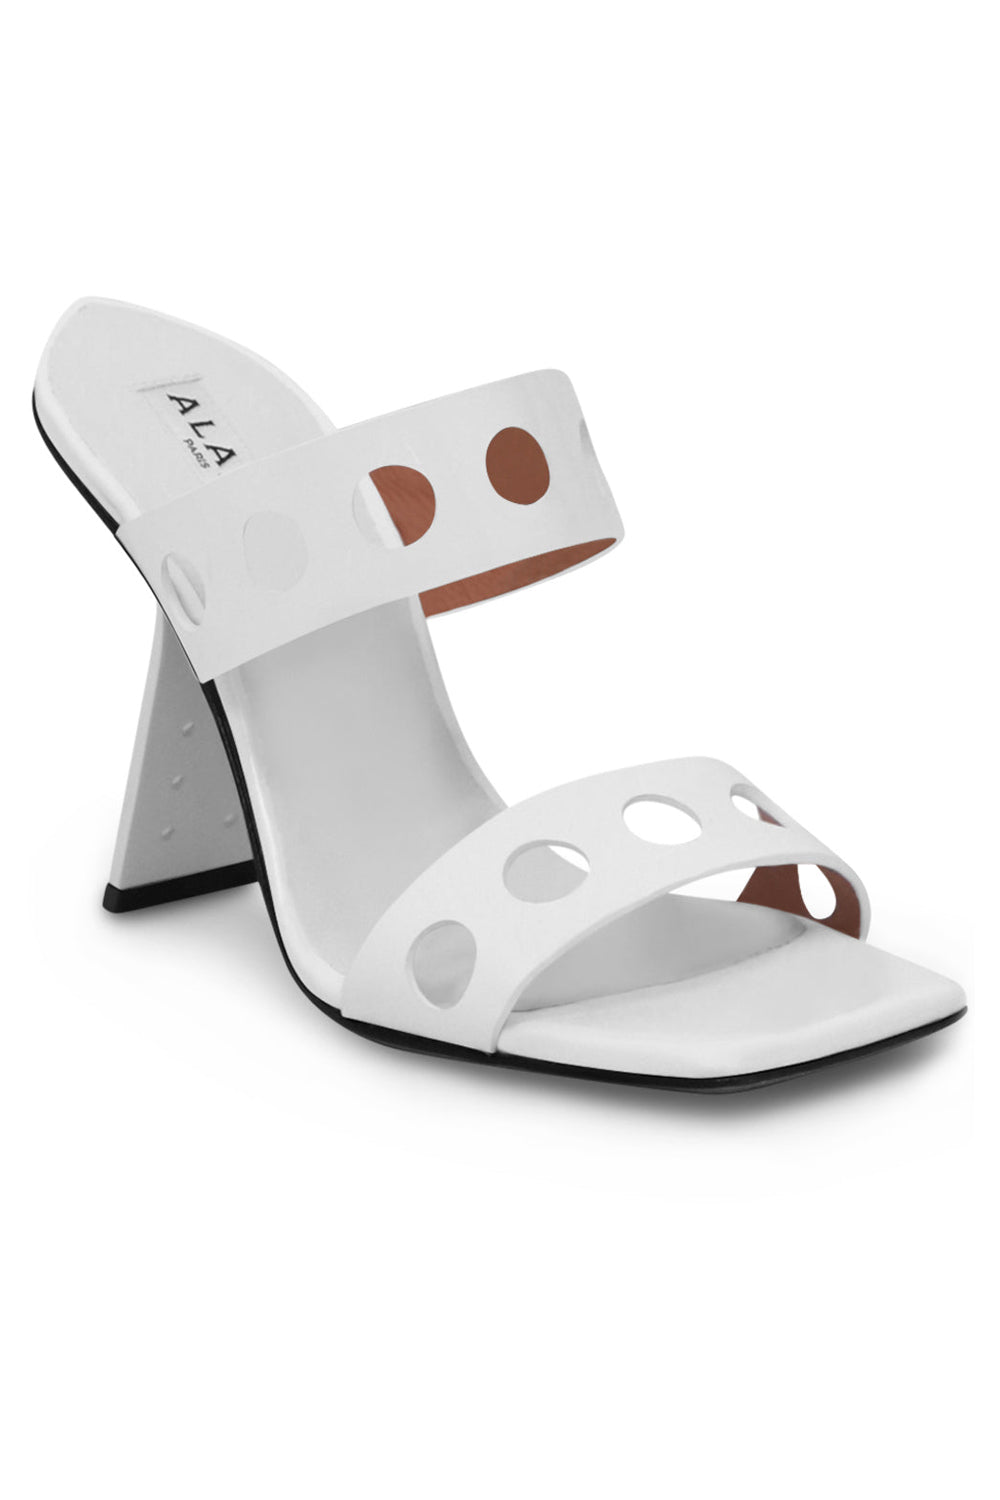 ALAIA SHOES PERFO MULE 100MM | WHITE